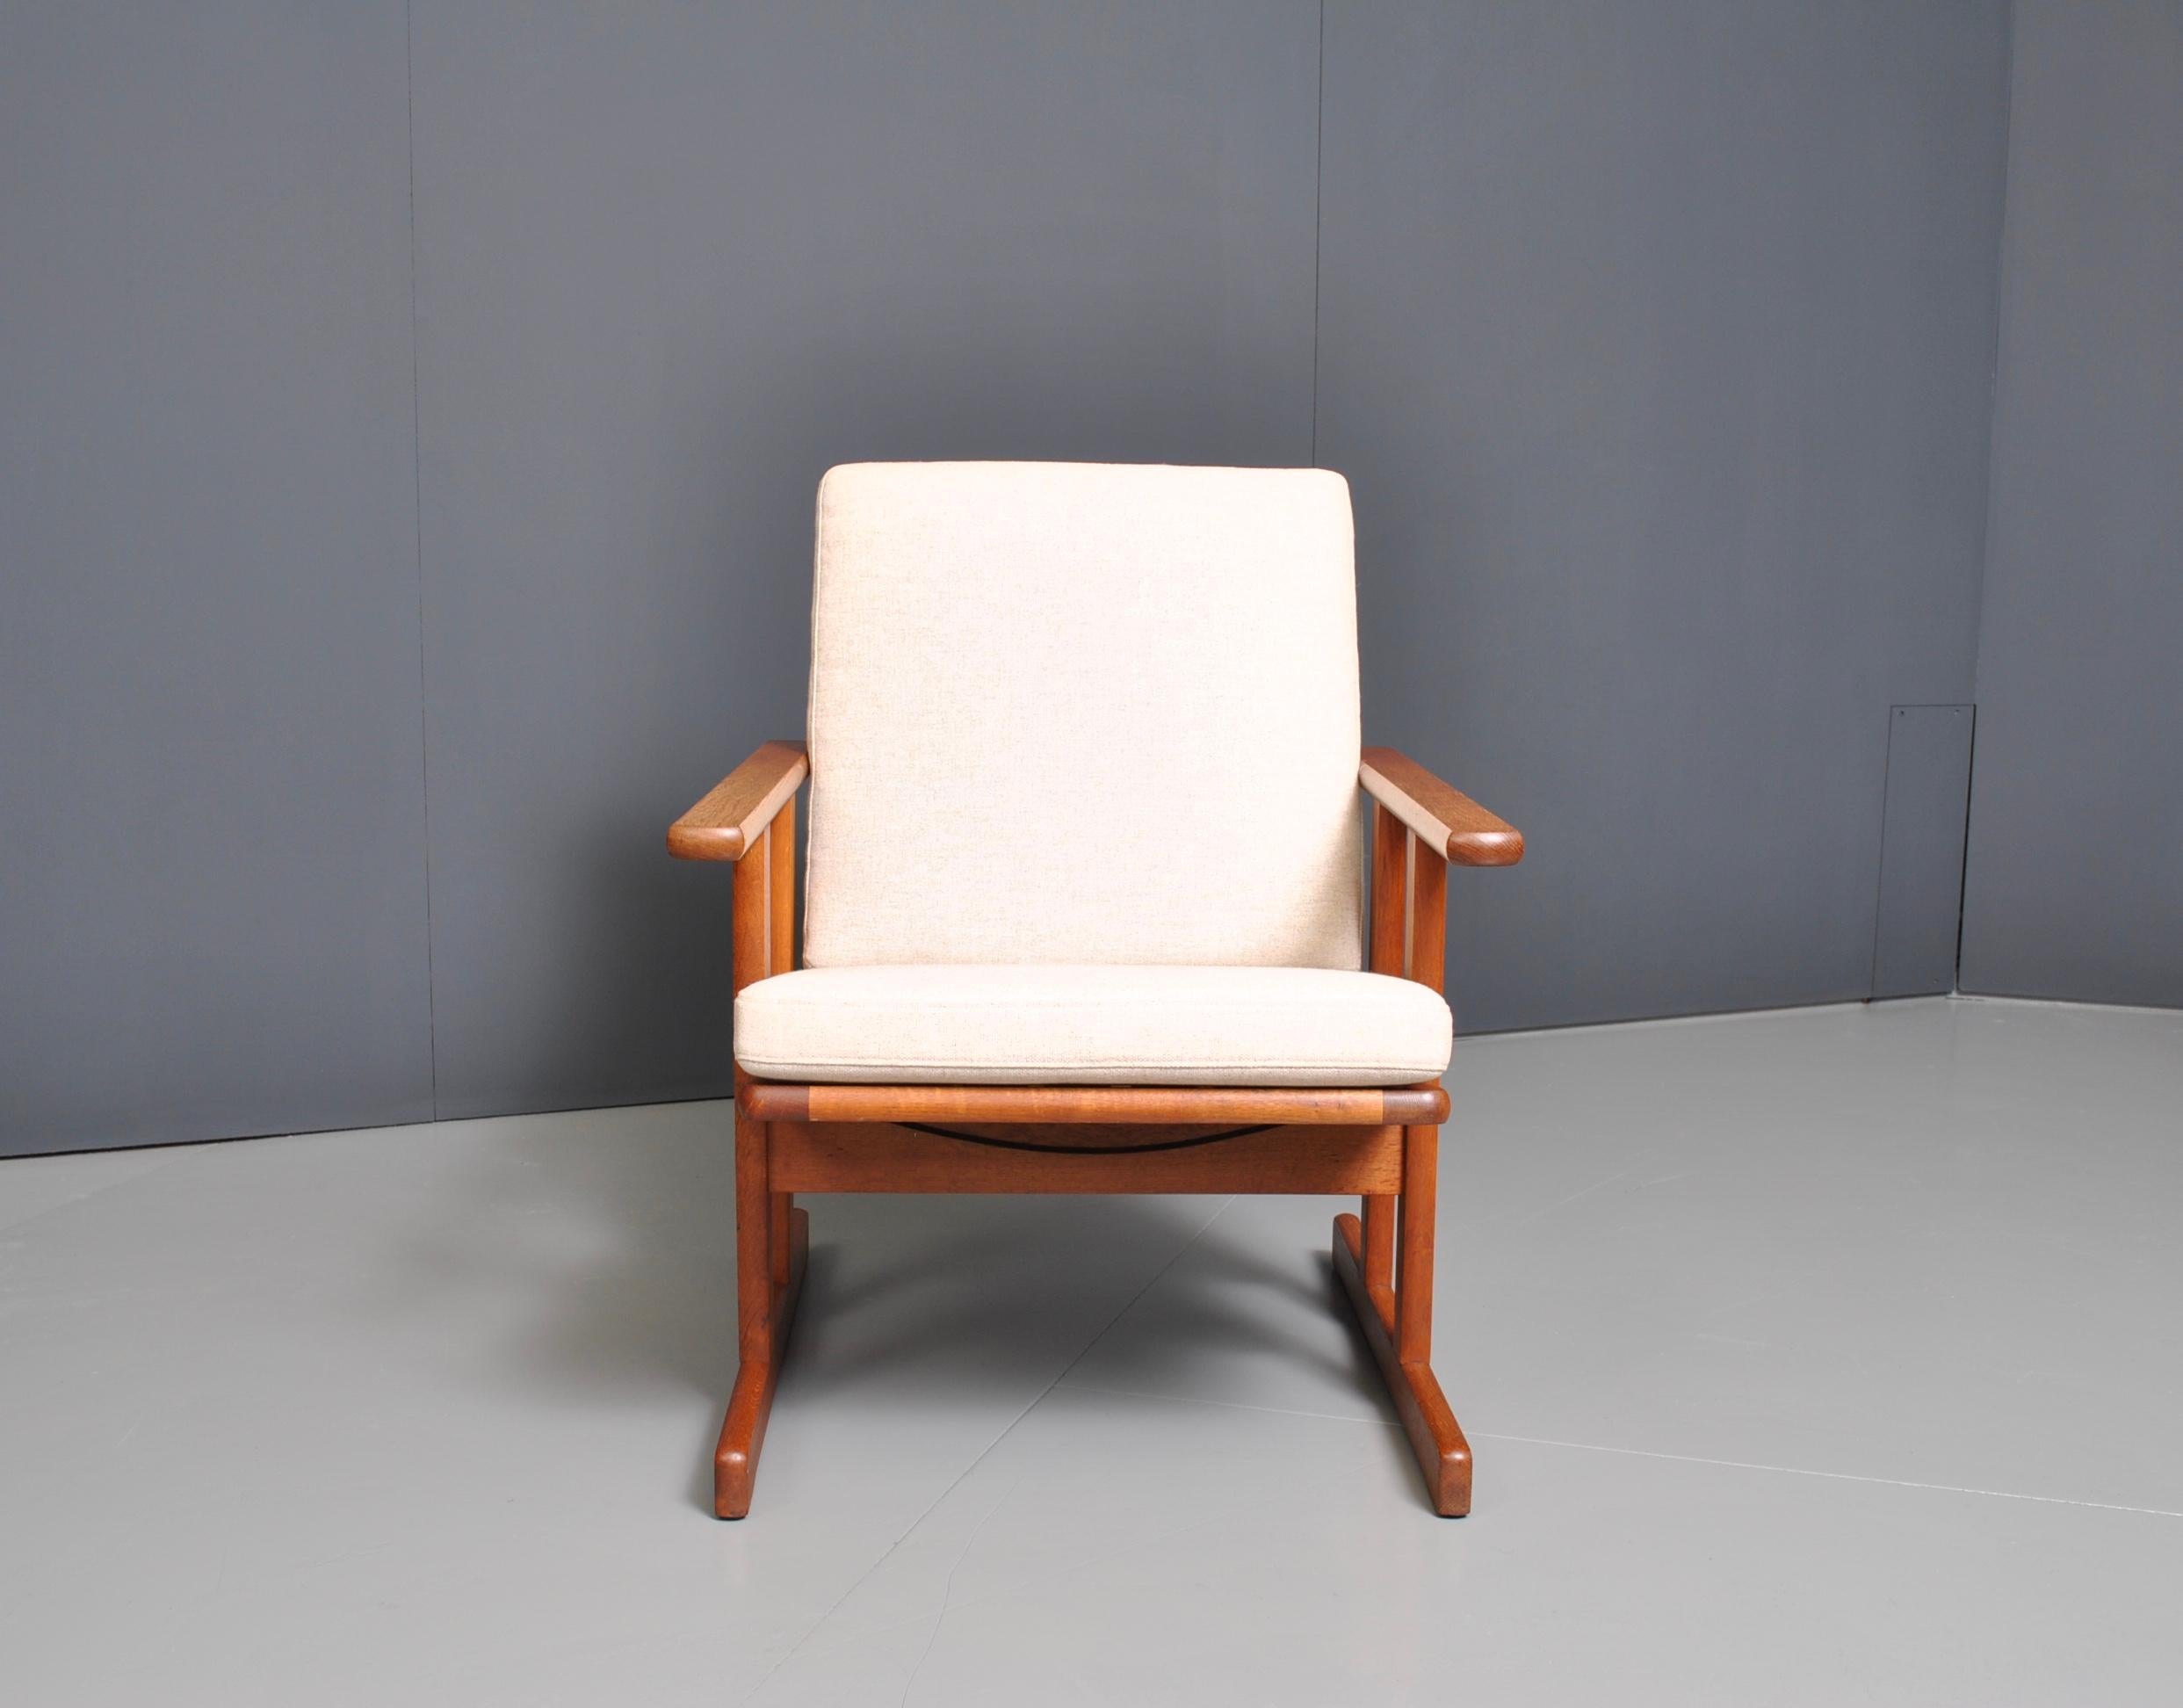 An early oak armchair by Jørgen Baekmark for FDB Møbler. Produced by FDB, circa 1950. Pure minimal Modernism in design with a serious nod to the mission and Arts & Crafts aesthetic. A rare early-midcentury easy chair. Fully reupholstered.